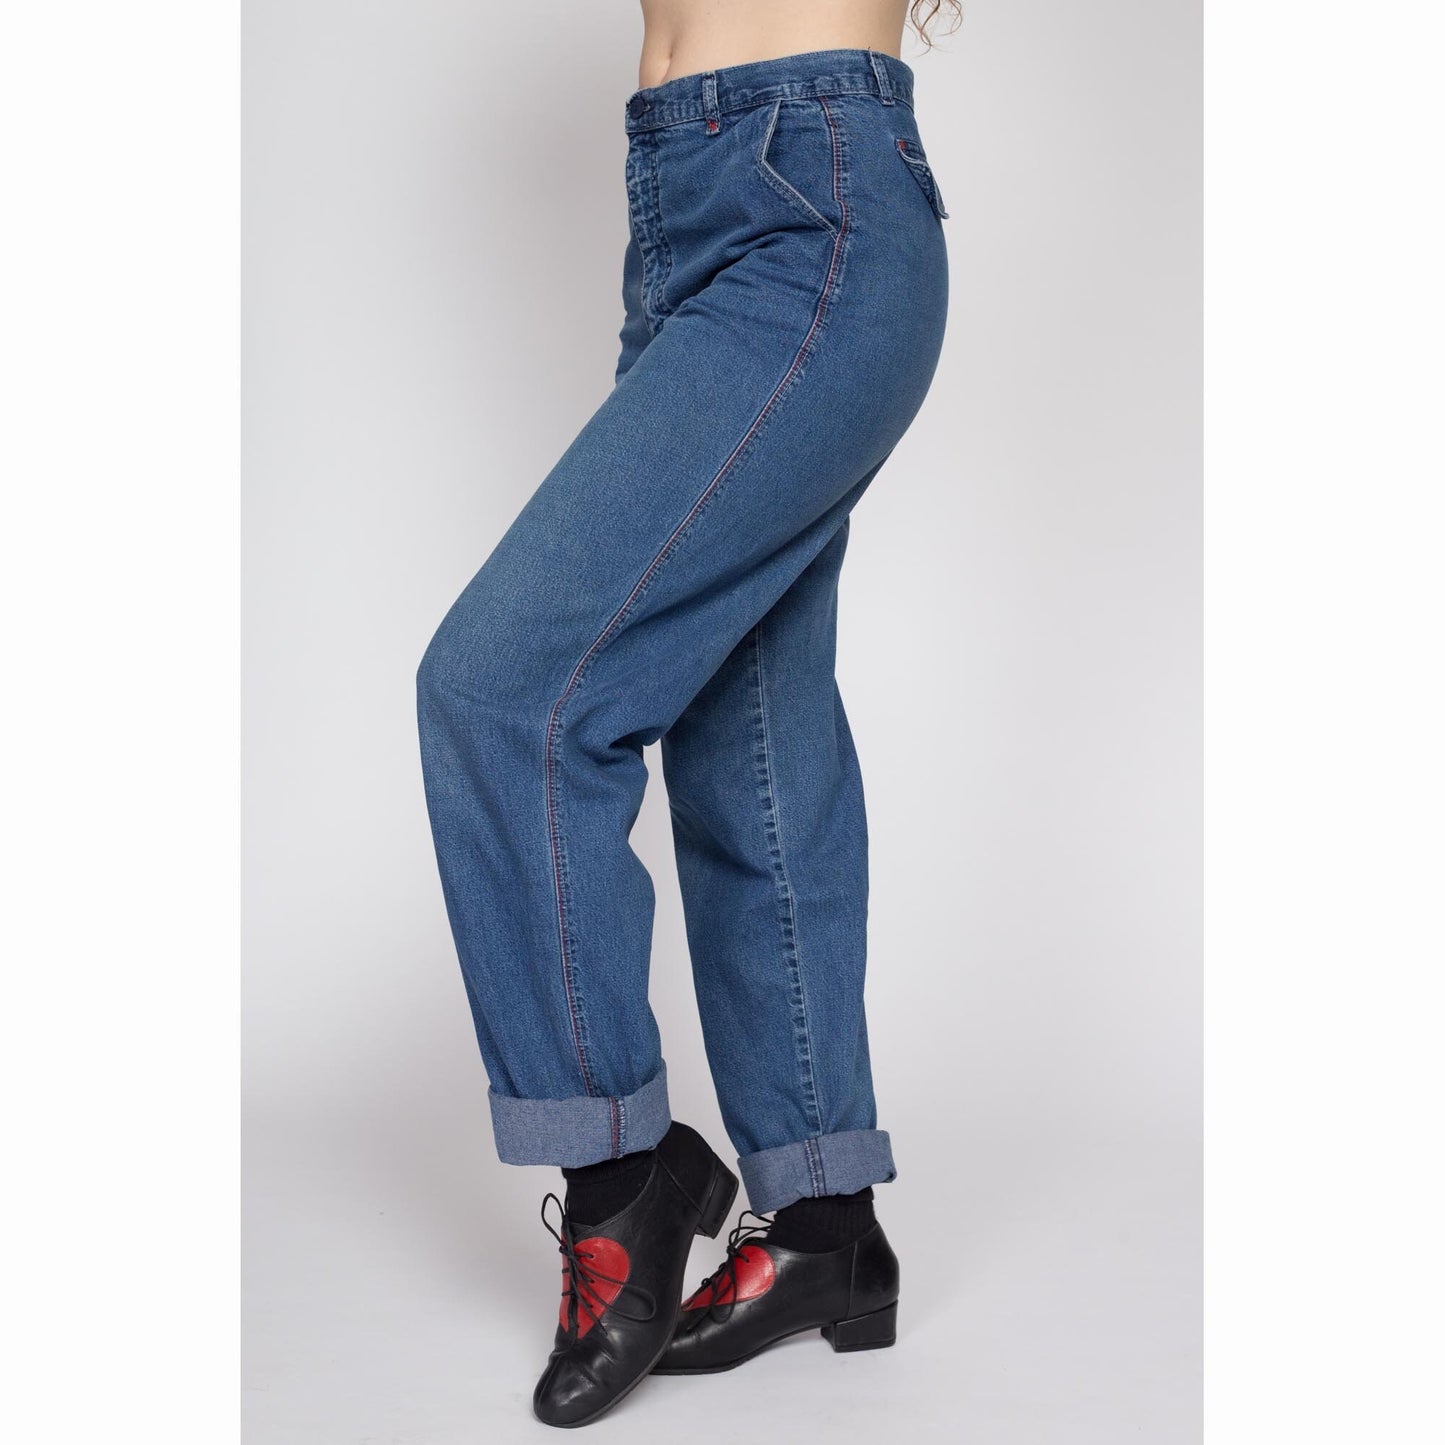 Medium 80s Rocky Mountain High Waisted Jeans 29" Tall | Vintage Medium Wash Long Inseam Mom Jeans